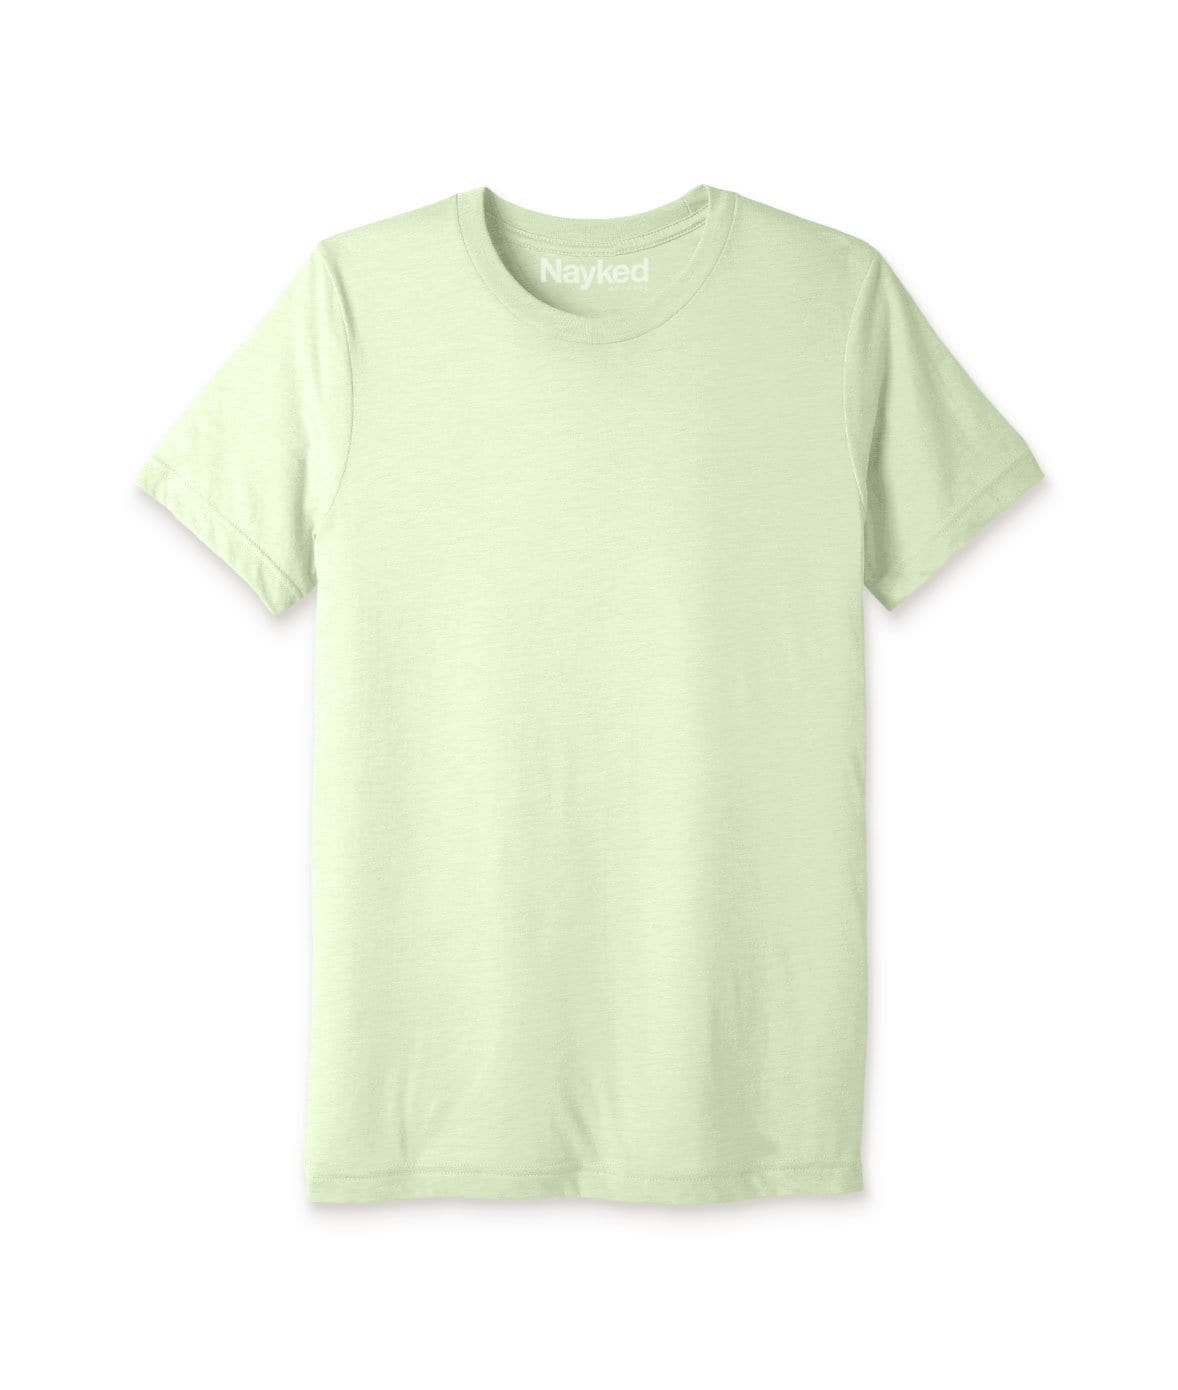 Shop Nayked Apparel Men's Ridiculously Soft Lightweight Crew Neck T-Shirt | New Arrival Colors | Tops, T-Shirts.